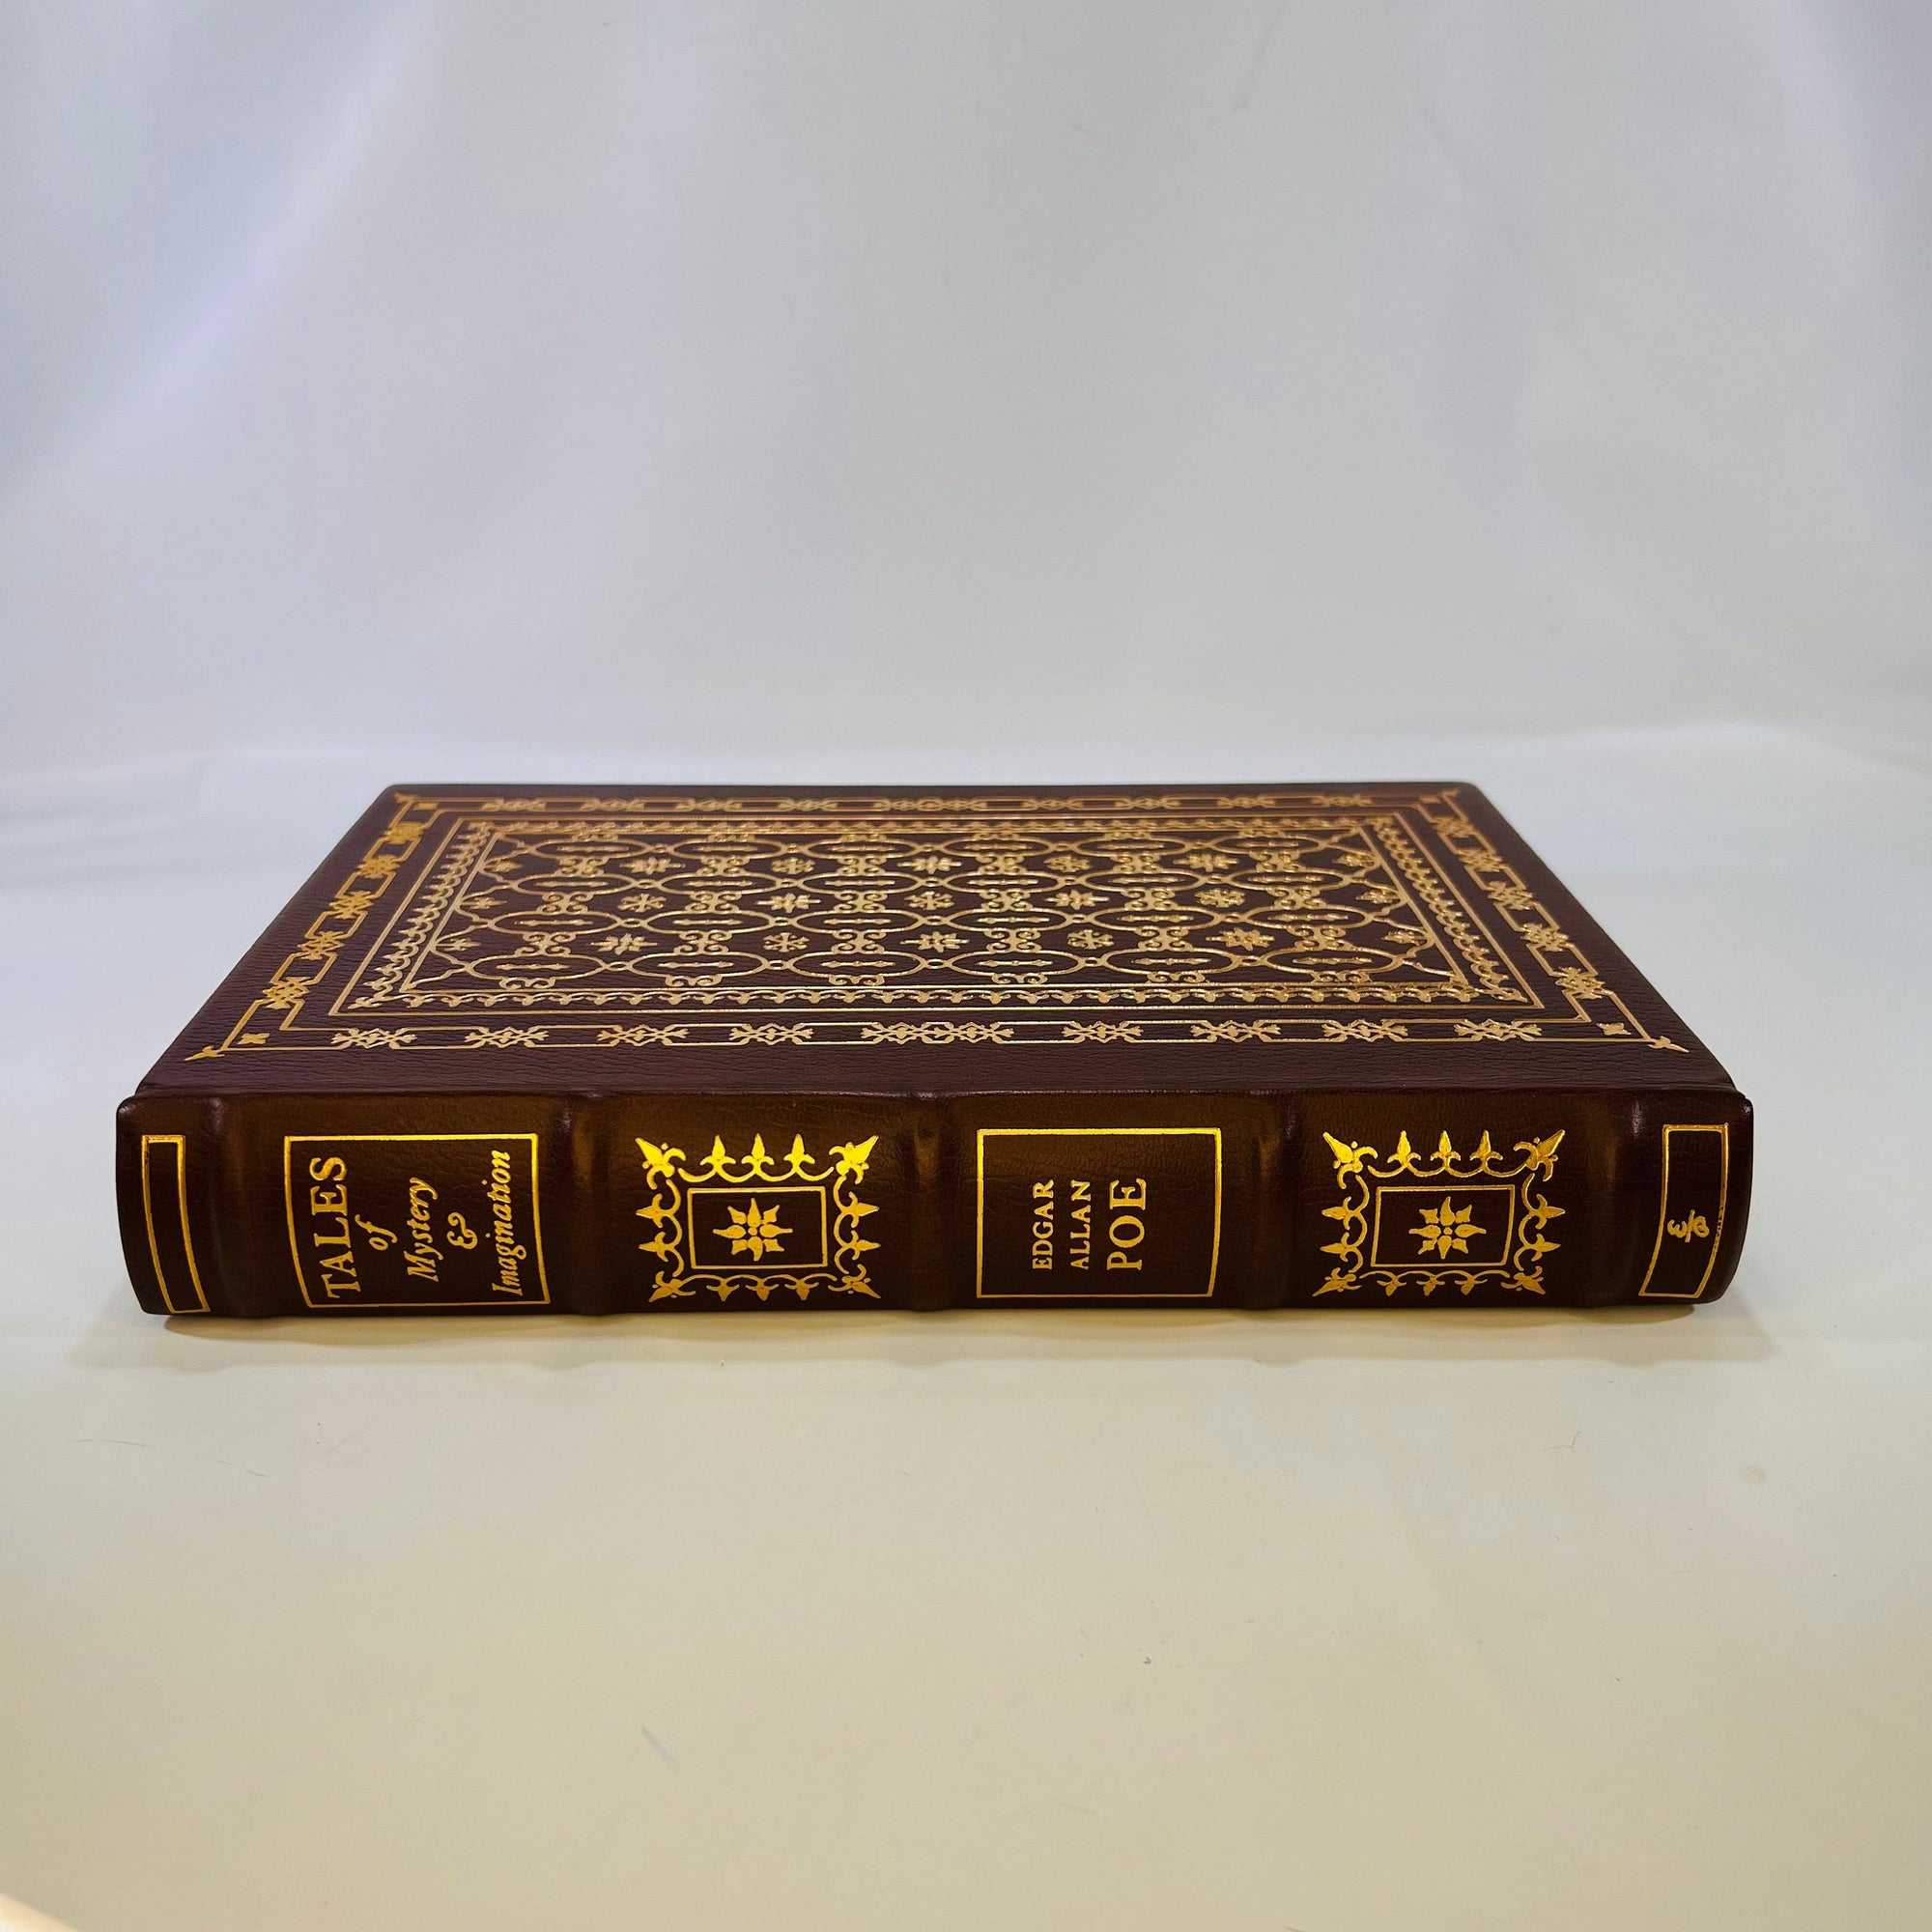 The Tales of Mystery & Imagination by Edgar Allan Poe 1975 Vintage Classic Easton Press part of the 100 Greatest Books